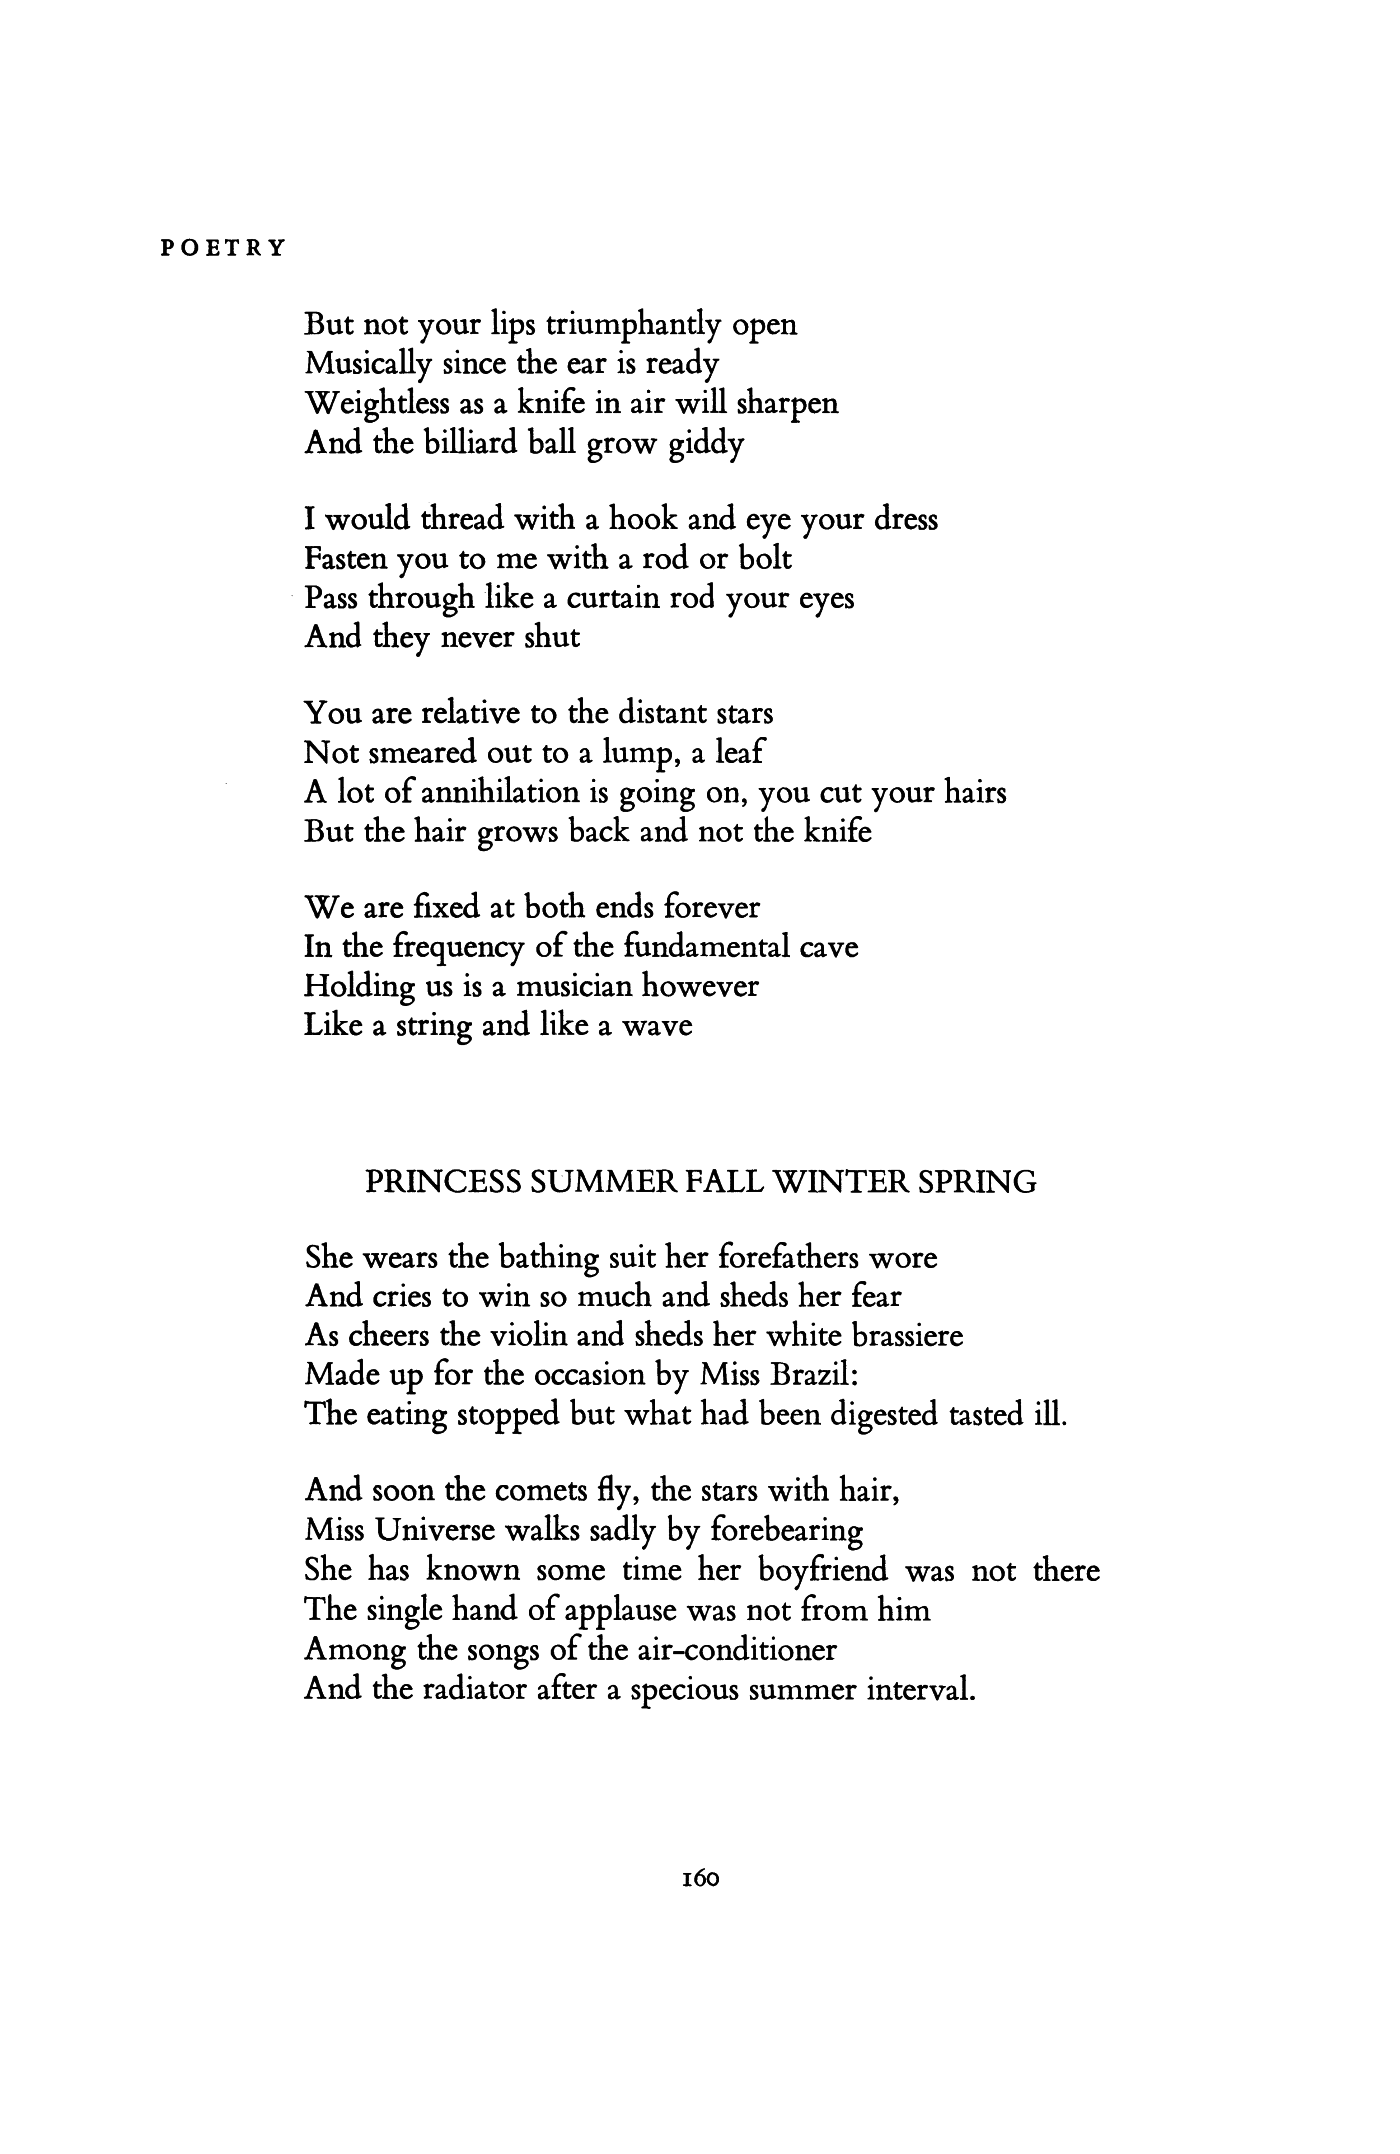 spring and fall poem